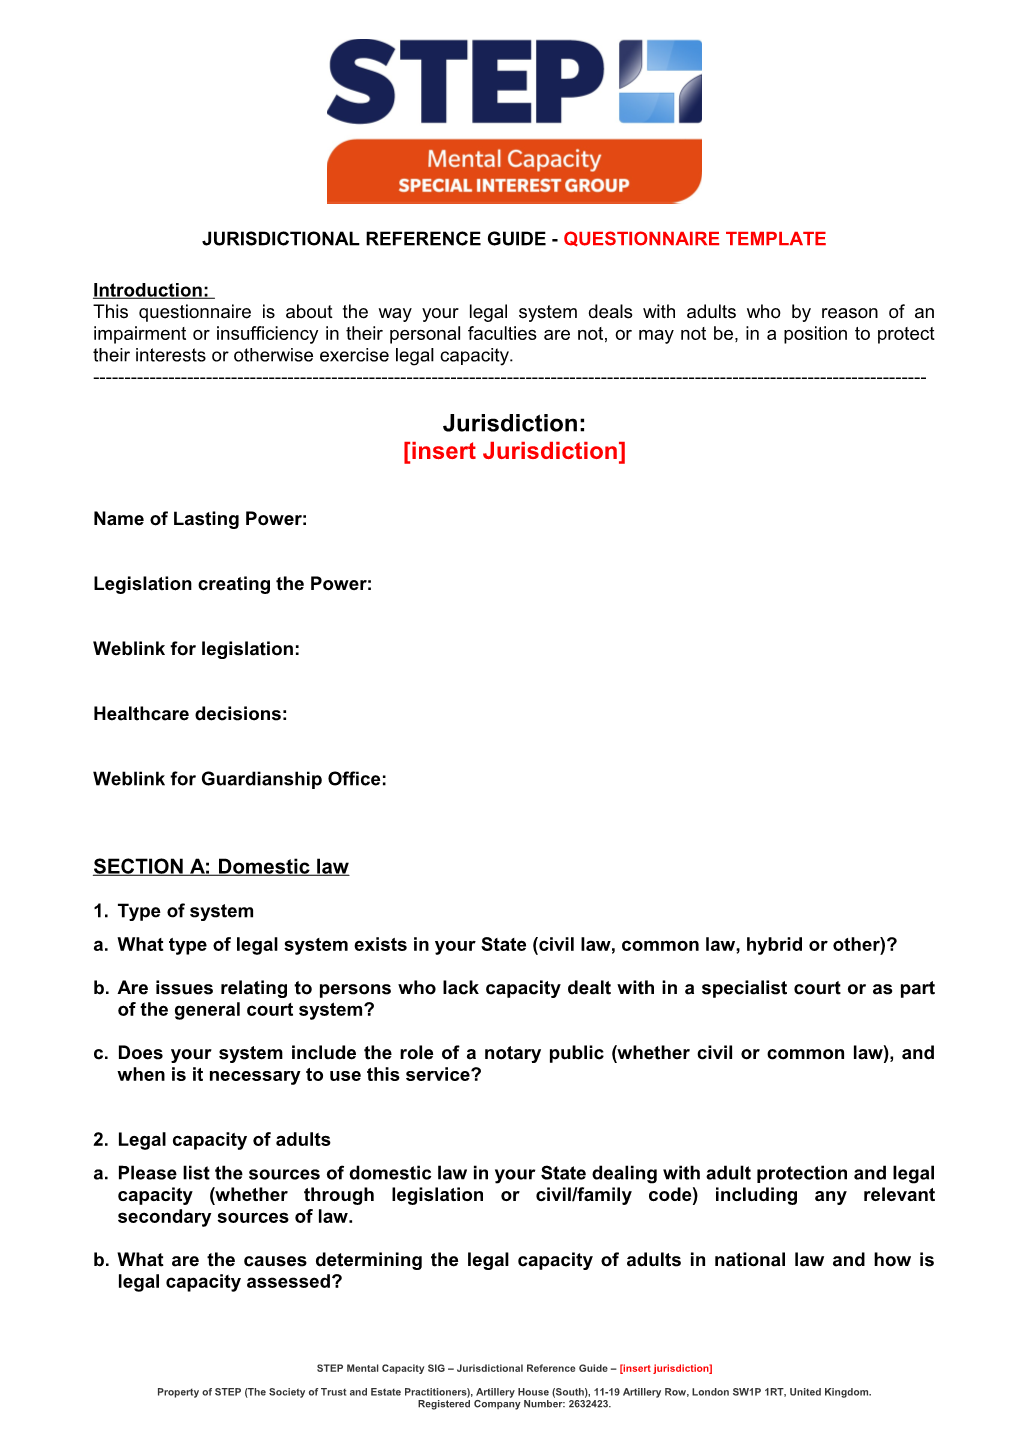 Jurisdictional Reference Guide -Questionnaire Template